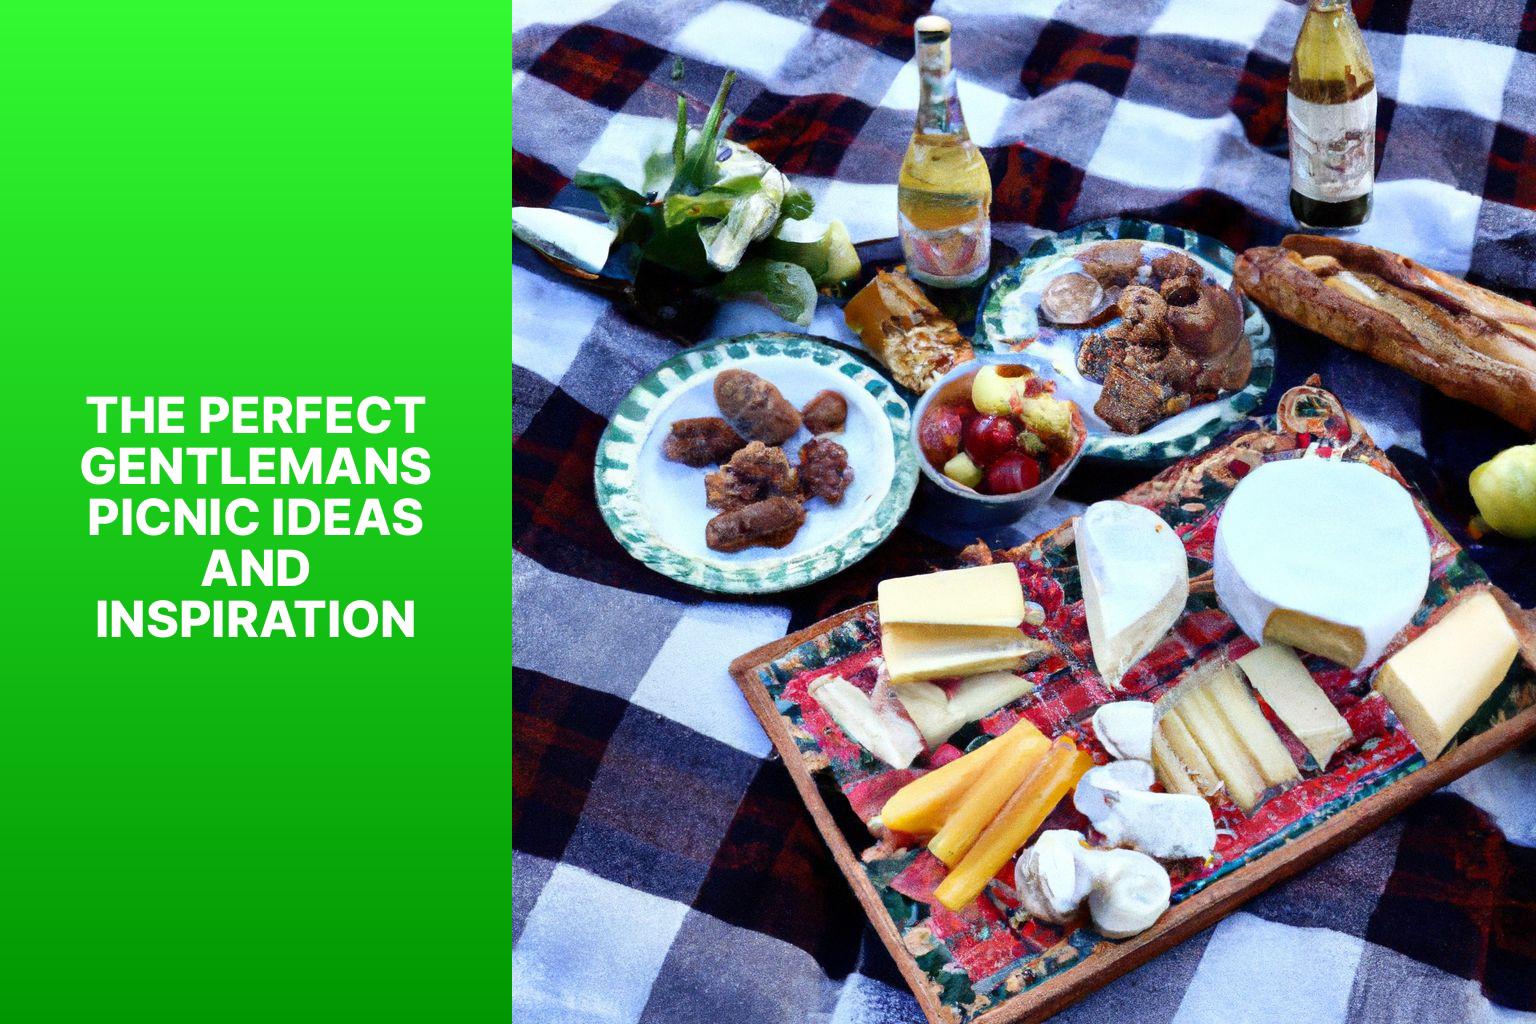 The Perfect Gentleman’s Picnic: Ideas and Inspiration